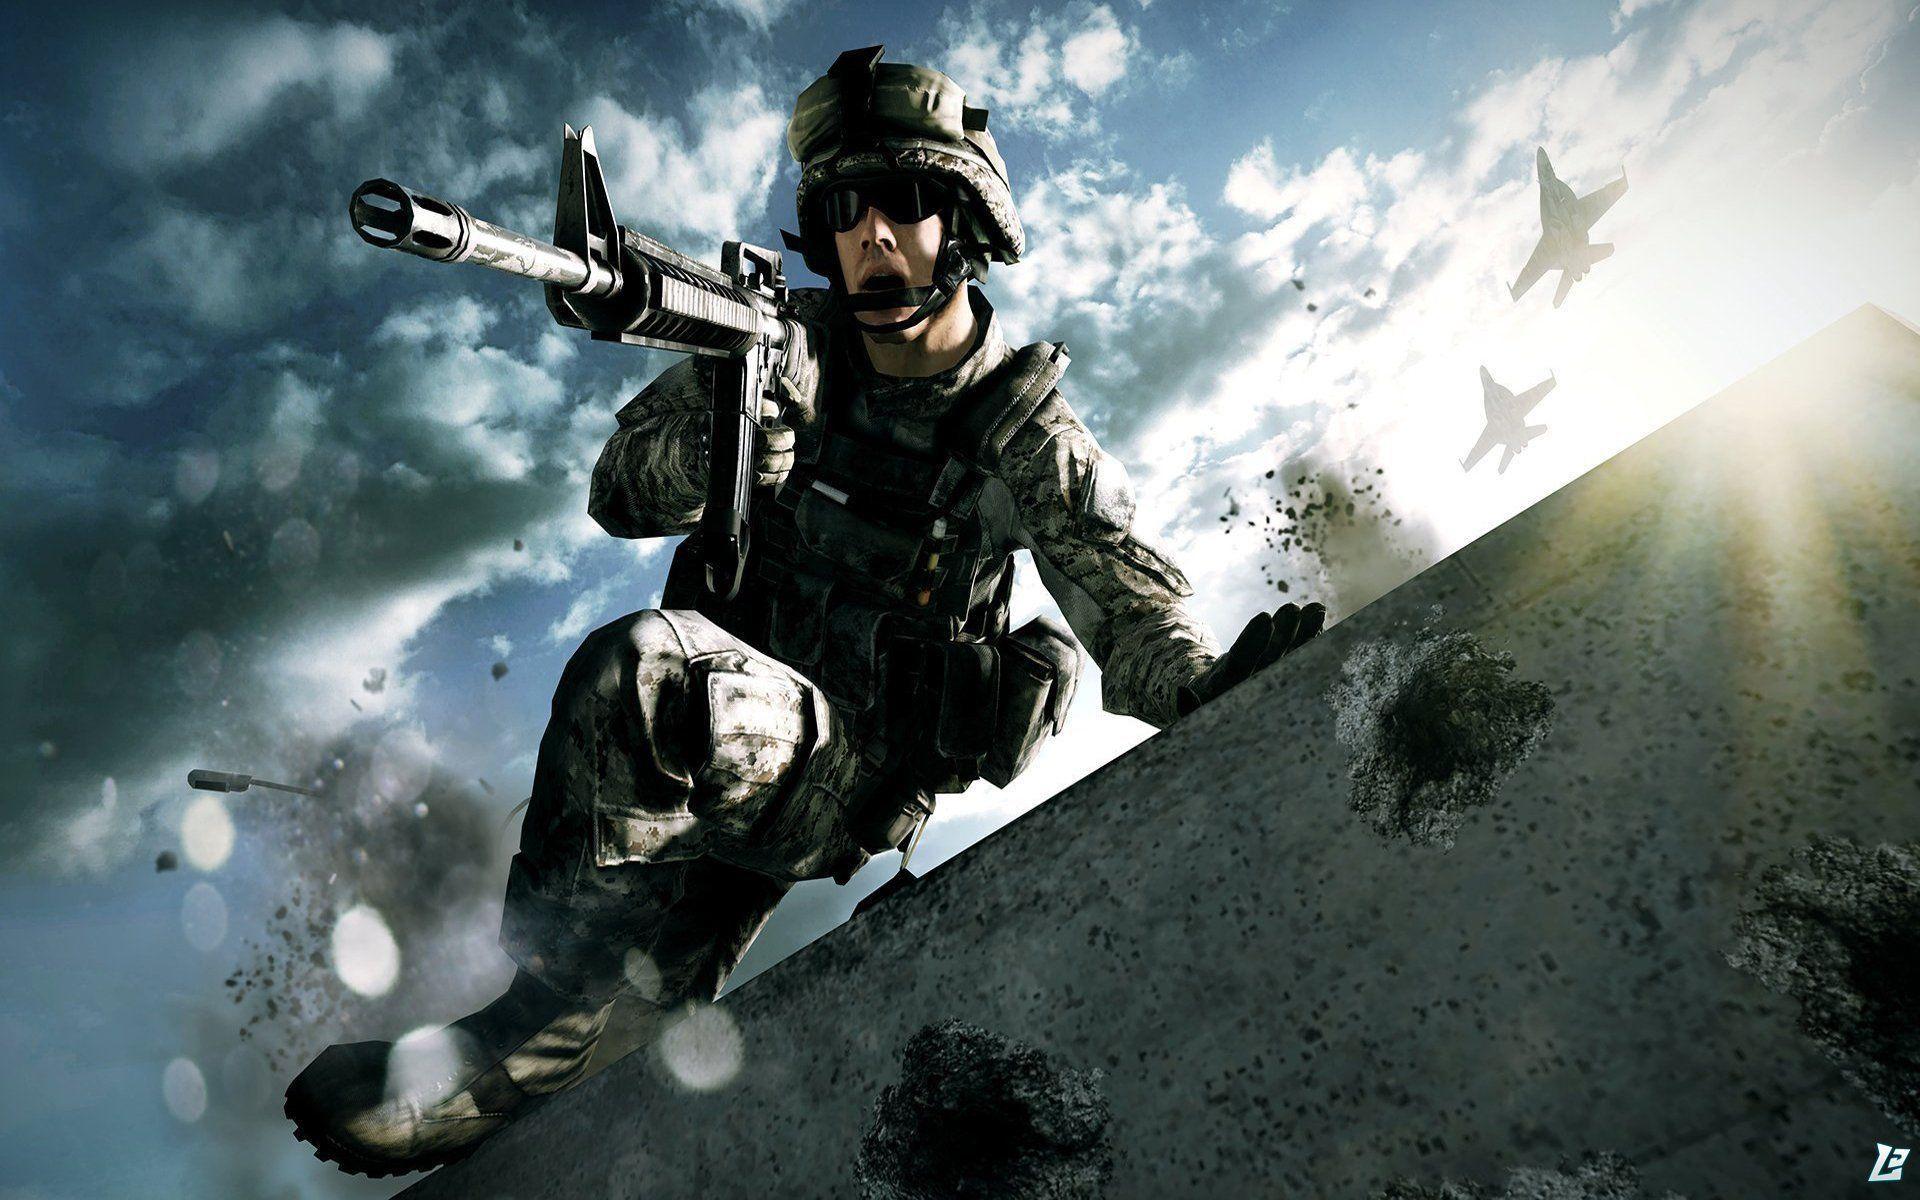 Battlefield 4 soldier wallpaper and image, picture